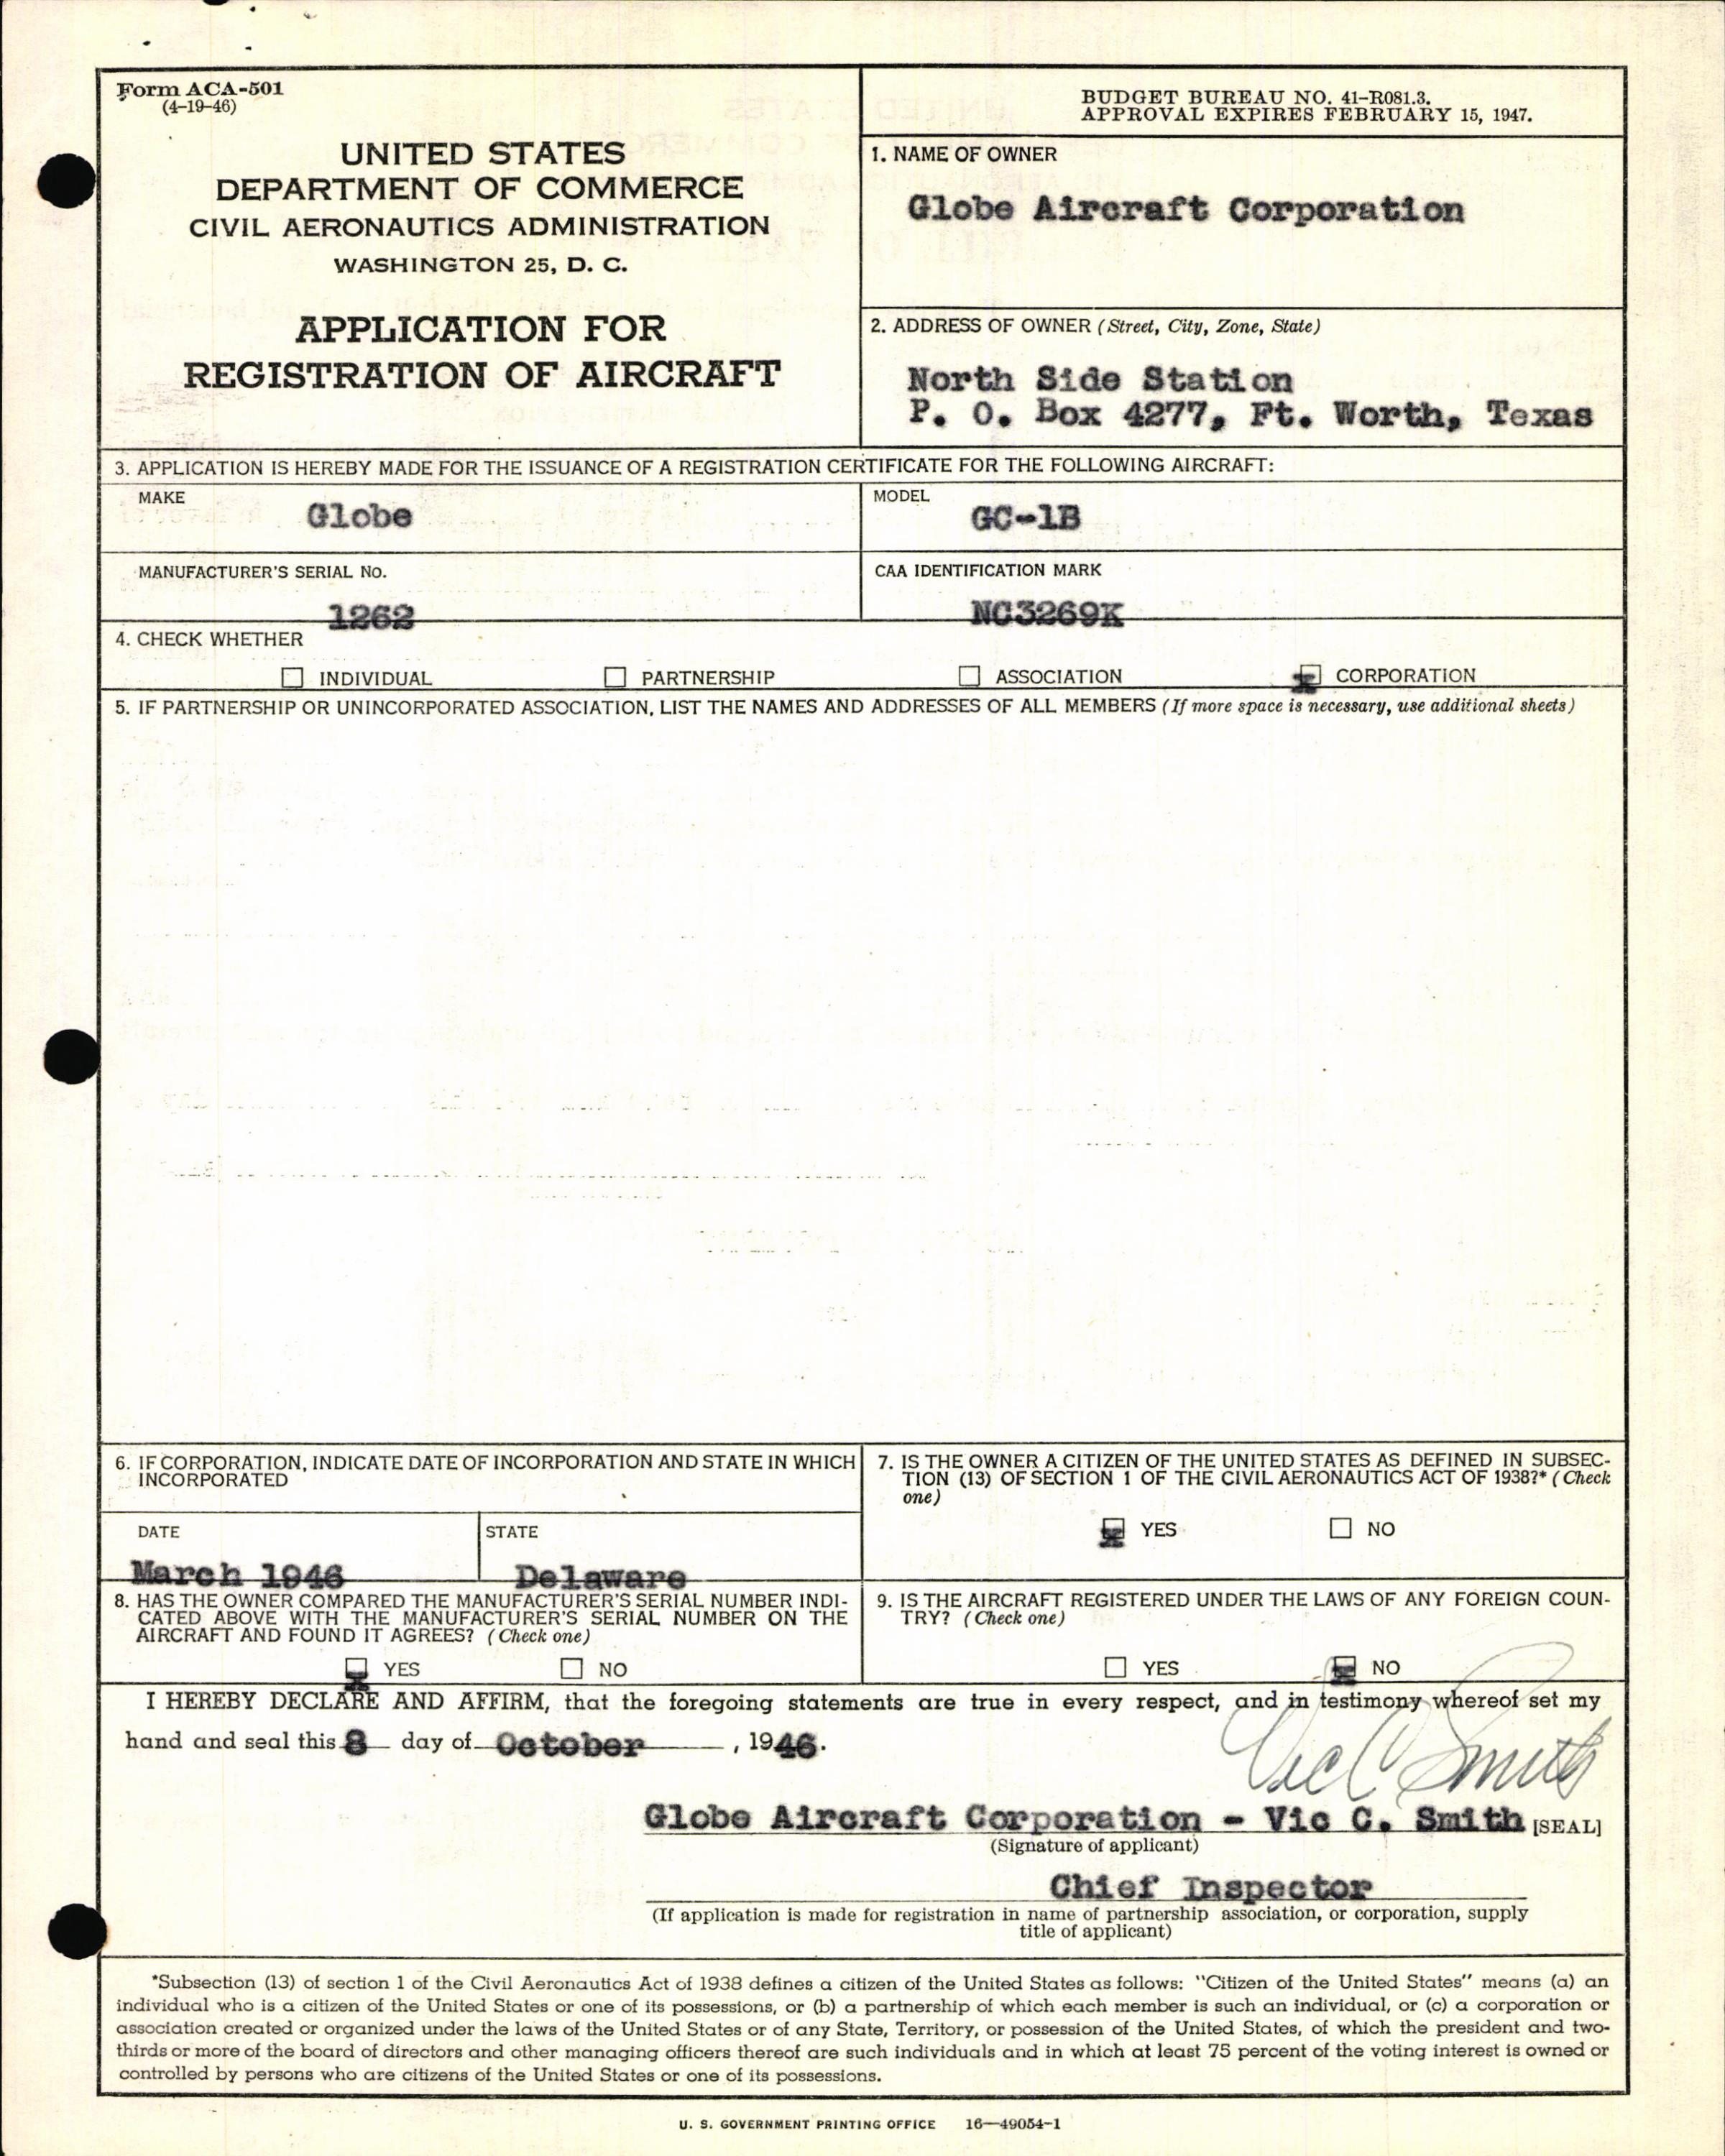 Sample page 5 from AirCorps Library document: Technical Information for Serial Number 1262